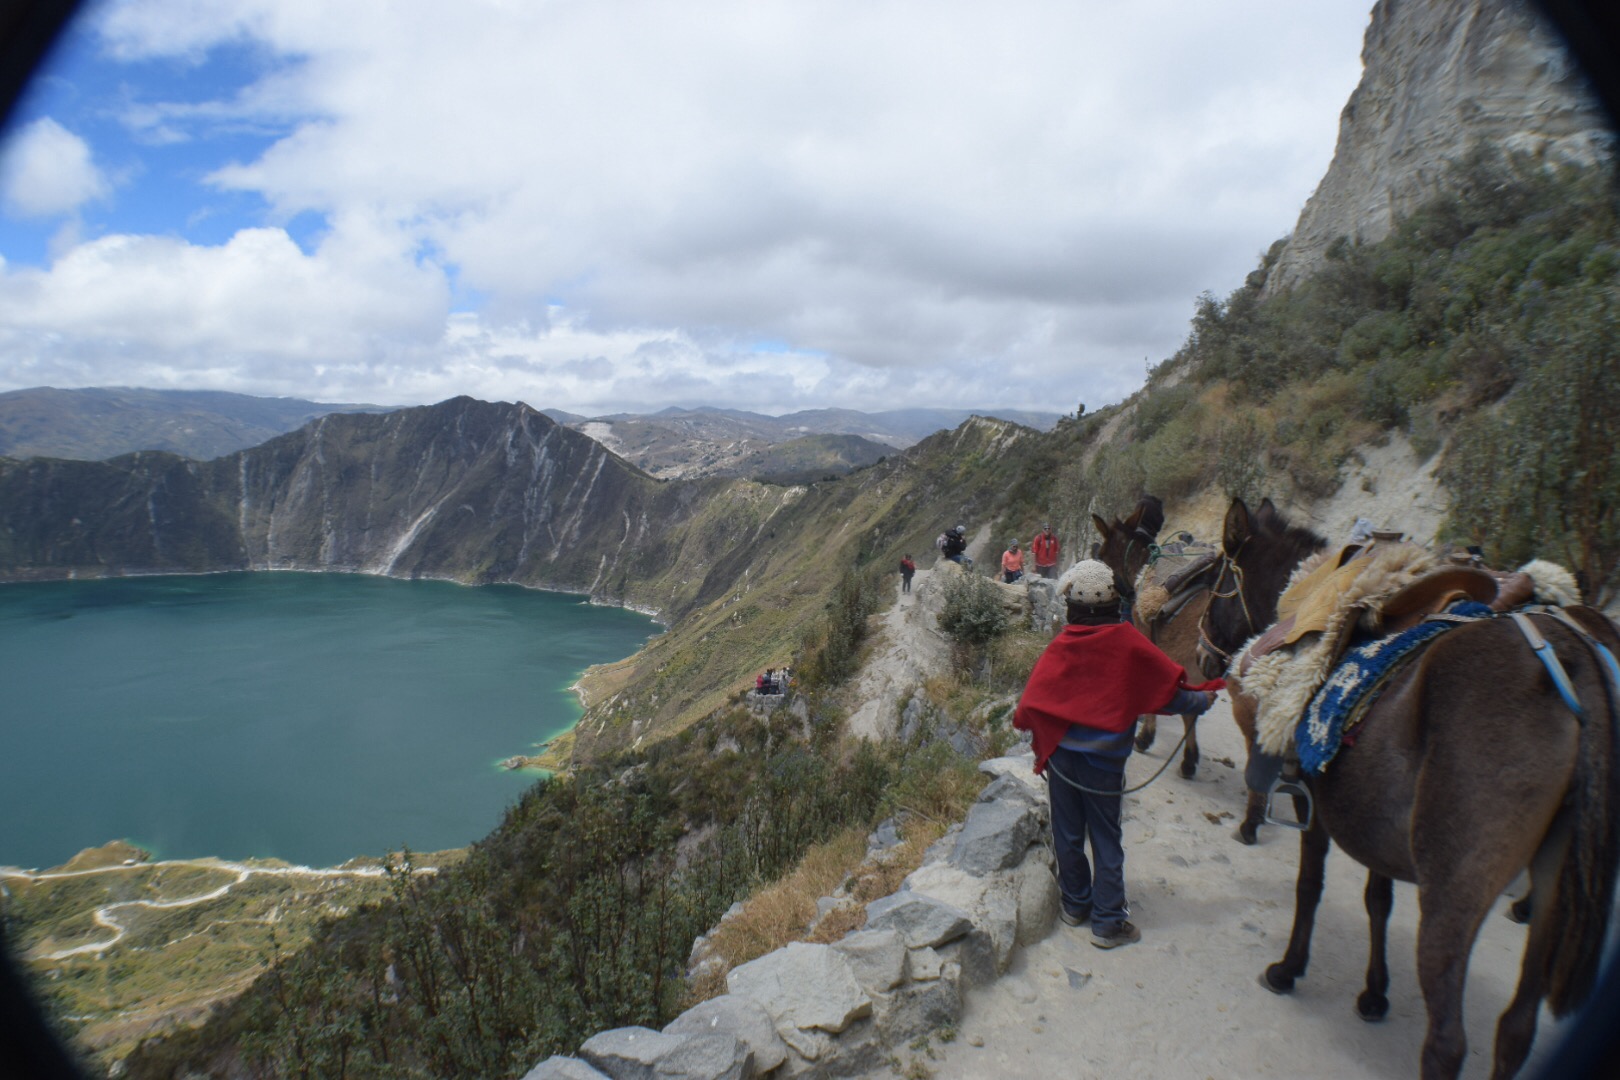 Quilotoa is a volcano lake, where you can hike down a dusty trail to the lake and ride kayaks. If you get tired you can pay to ride an horse or donkey back up.